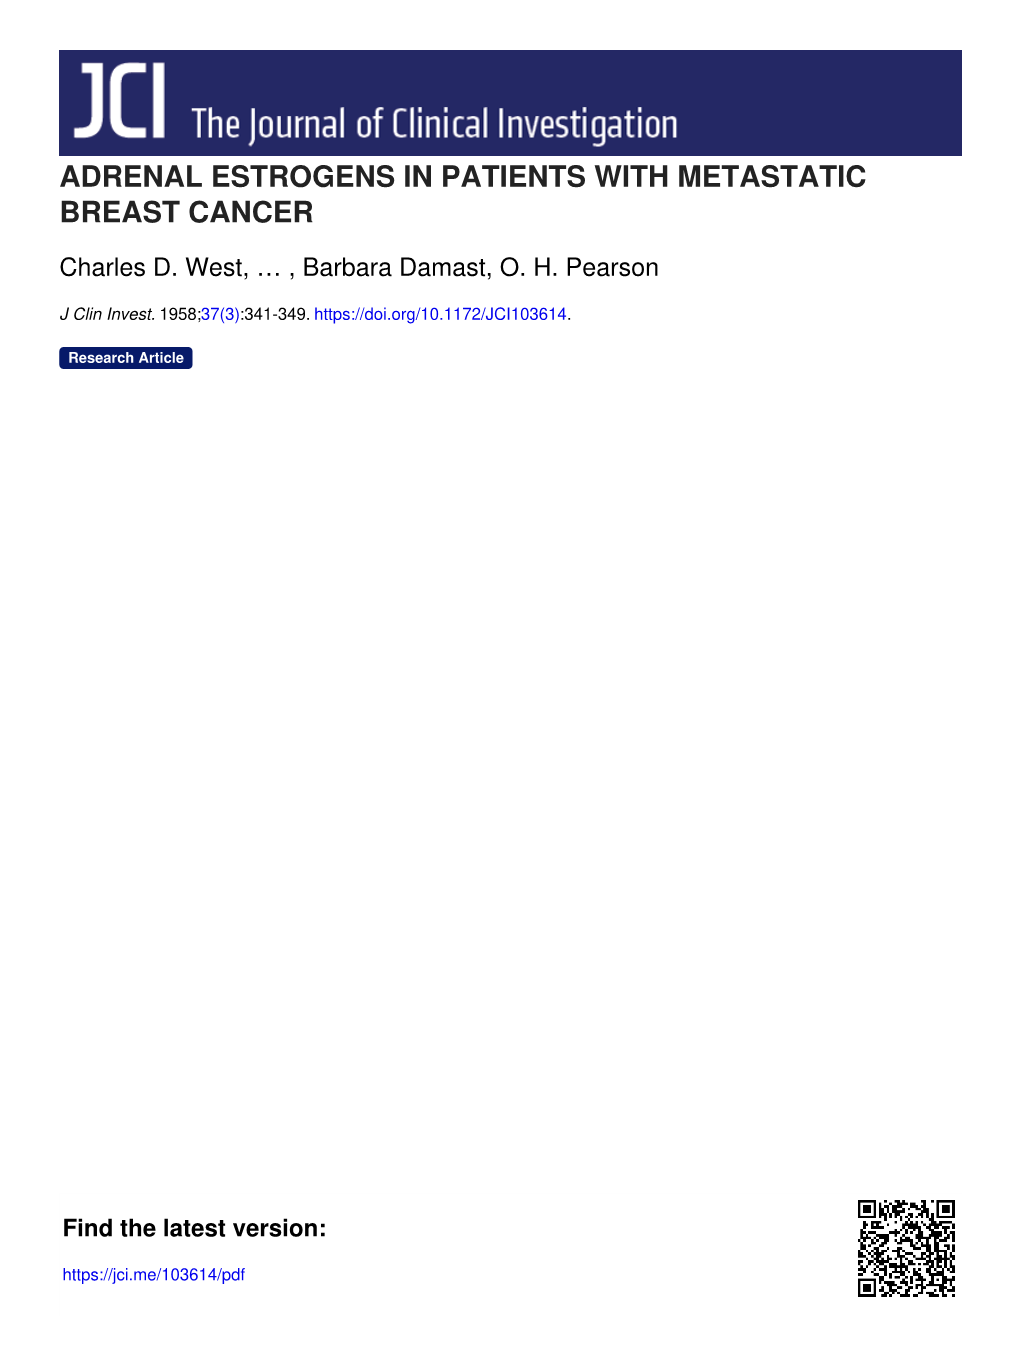 Adrenal Estrogens in Patients with Metastatic Breast Cancer